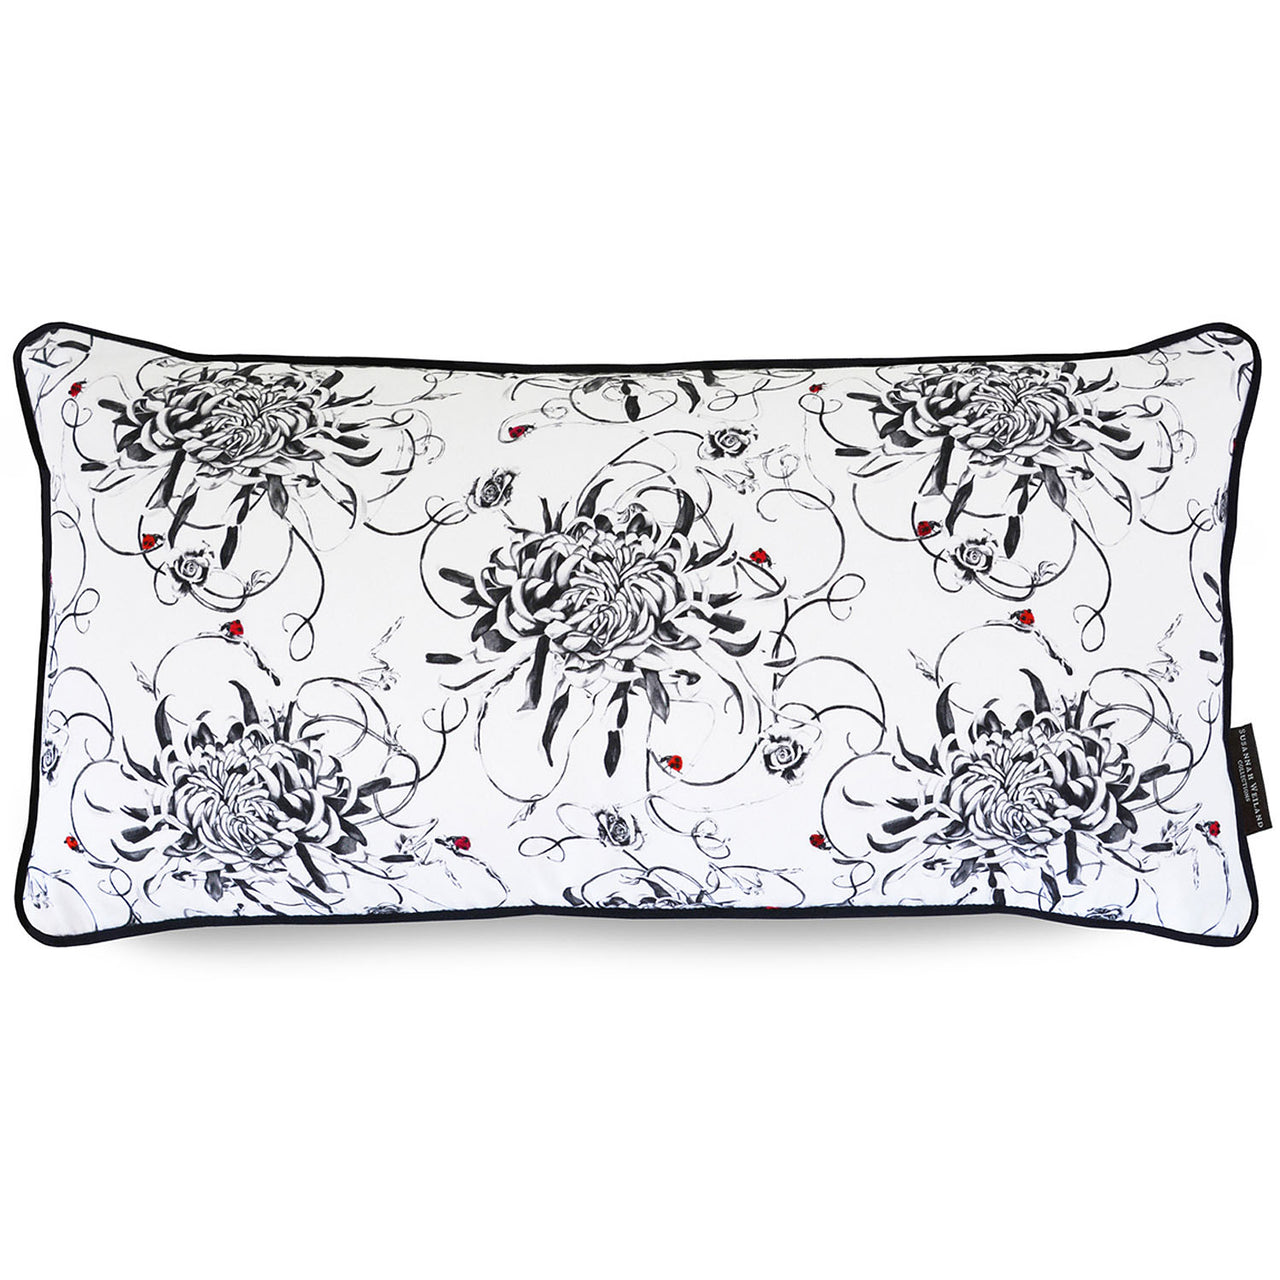 Monochrome floral bolster cushion with hand embroidered ladybirds 